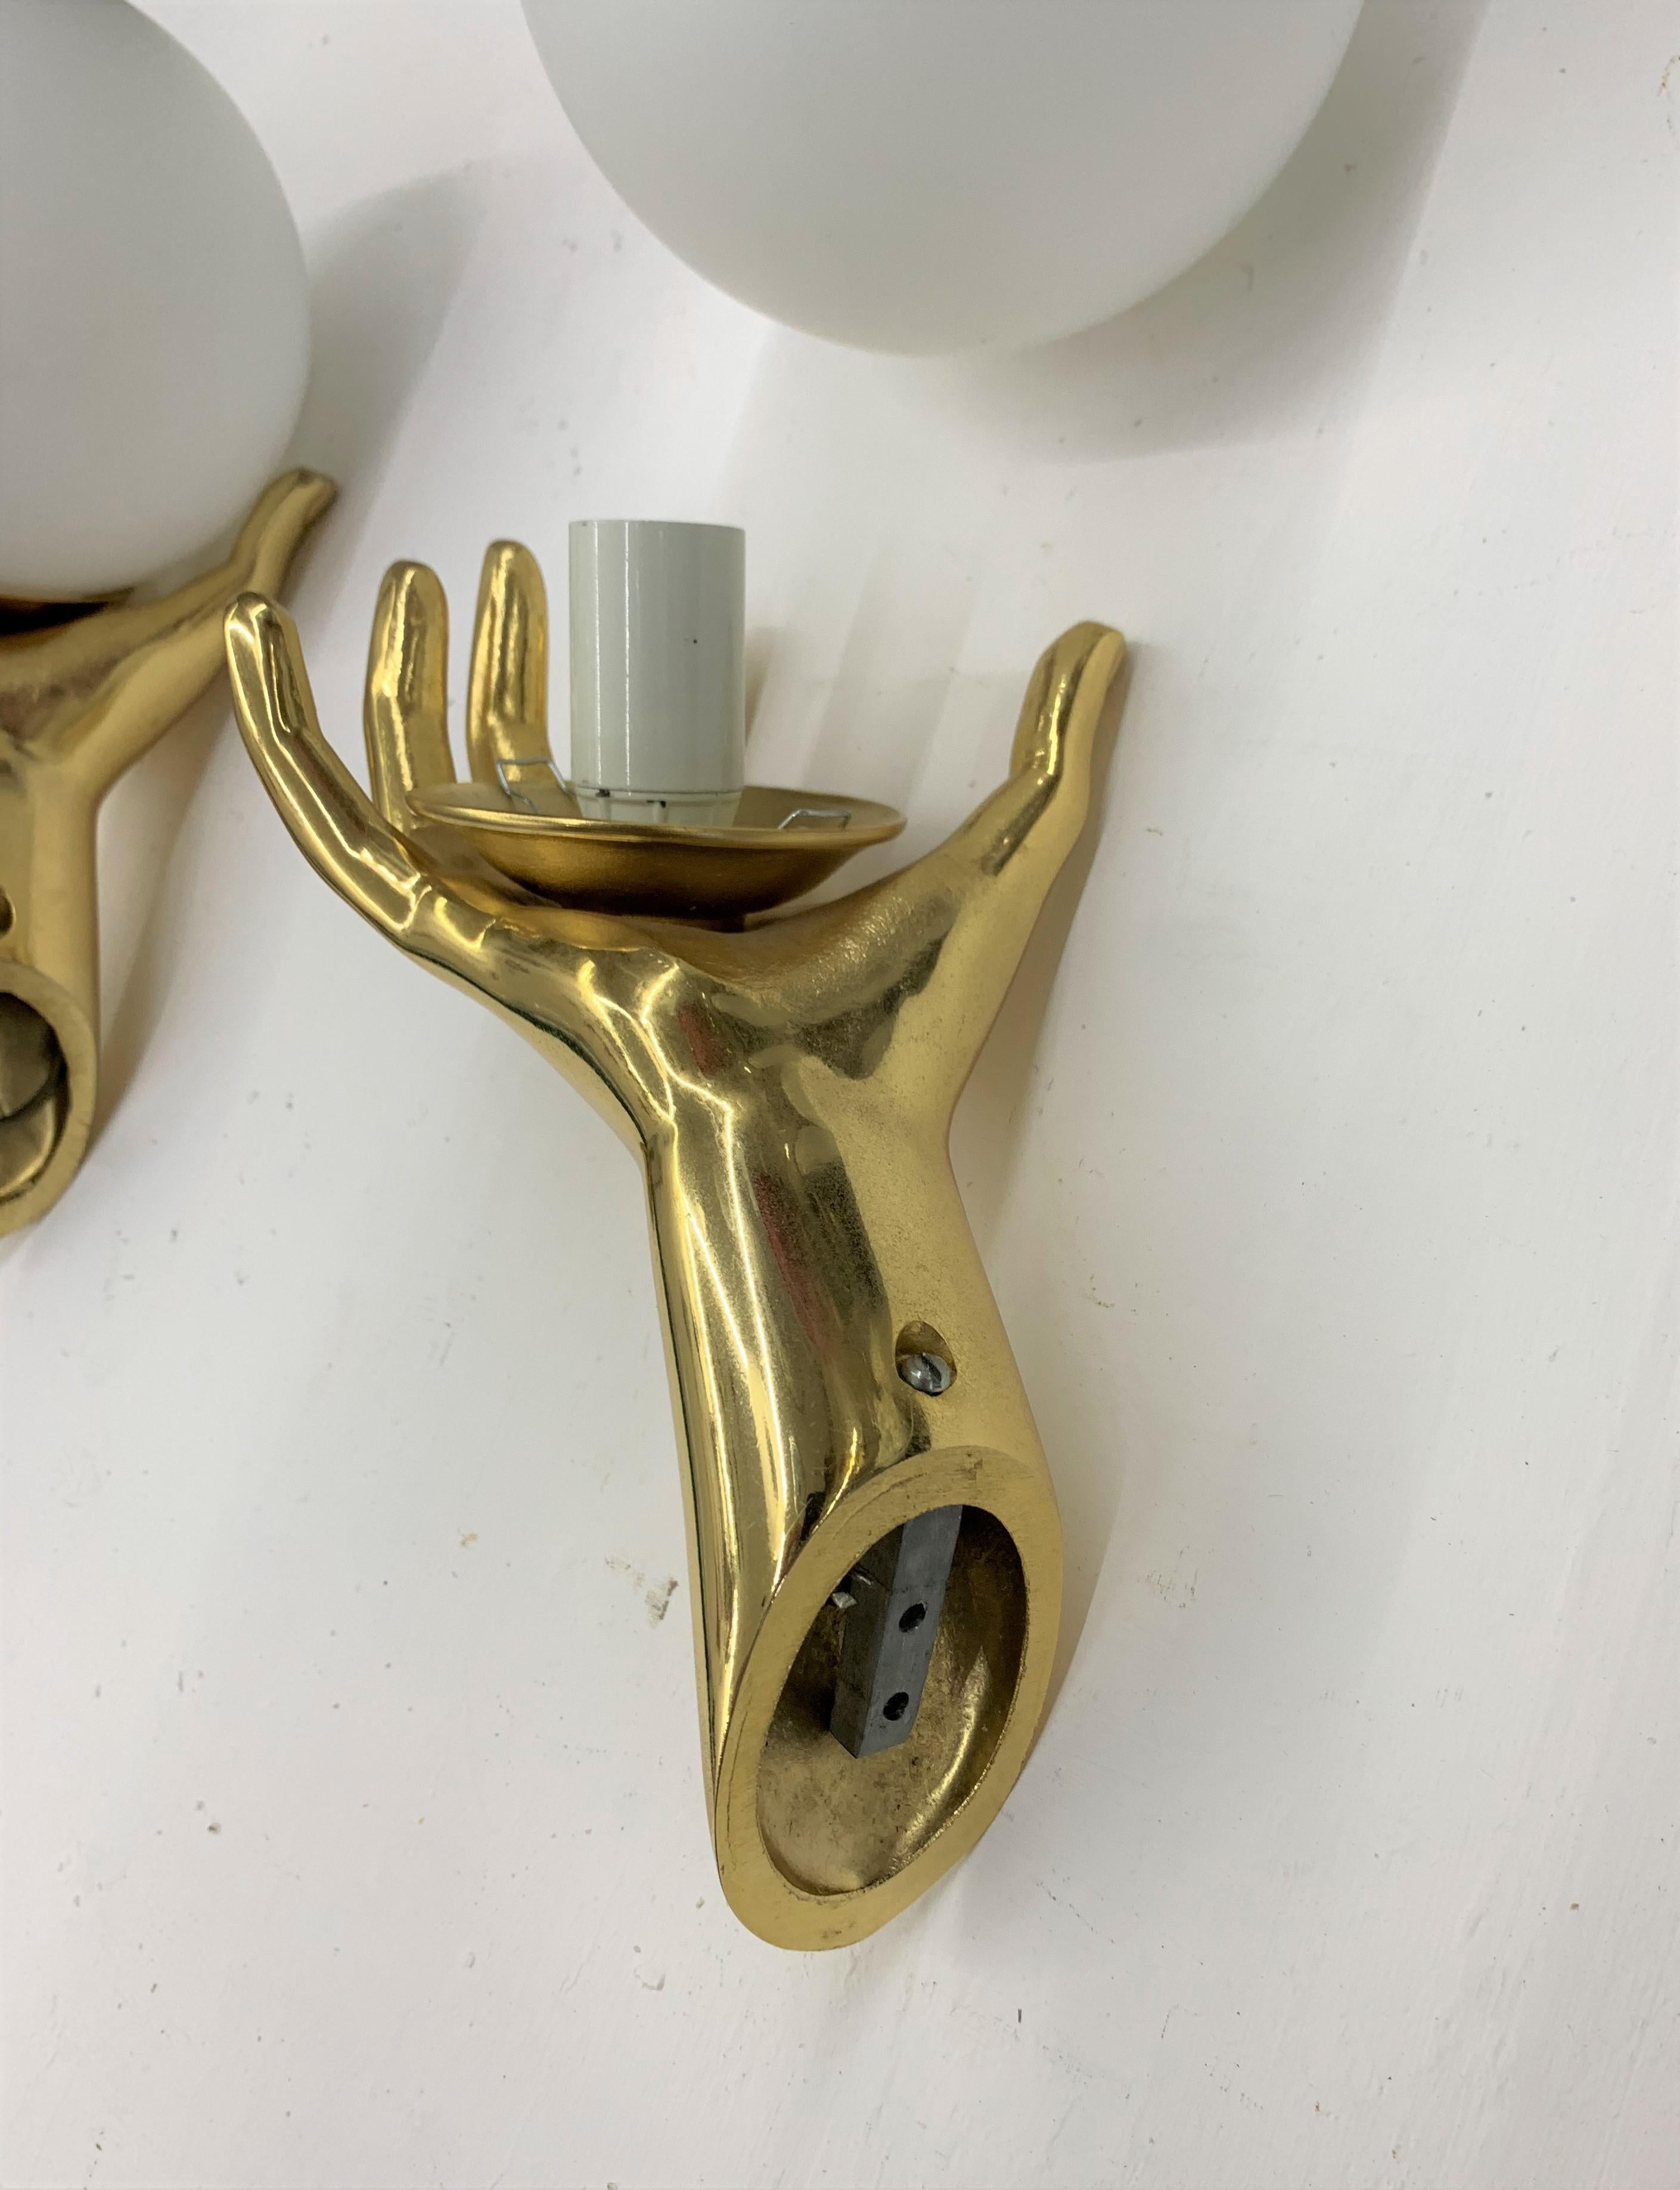 French Modernist Sconces by Maison Arlus in Gilt Bronze and Opaline Glass, France